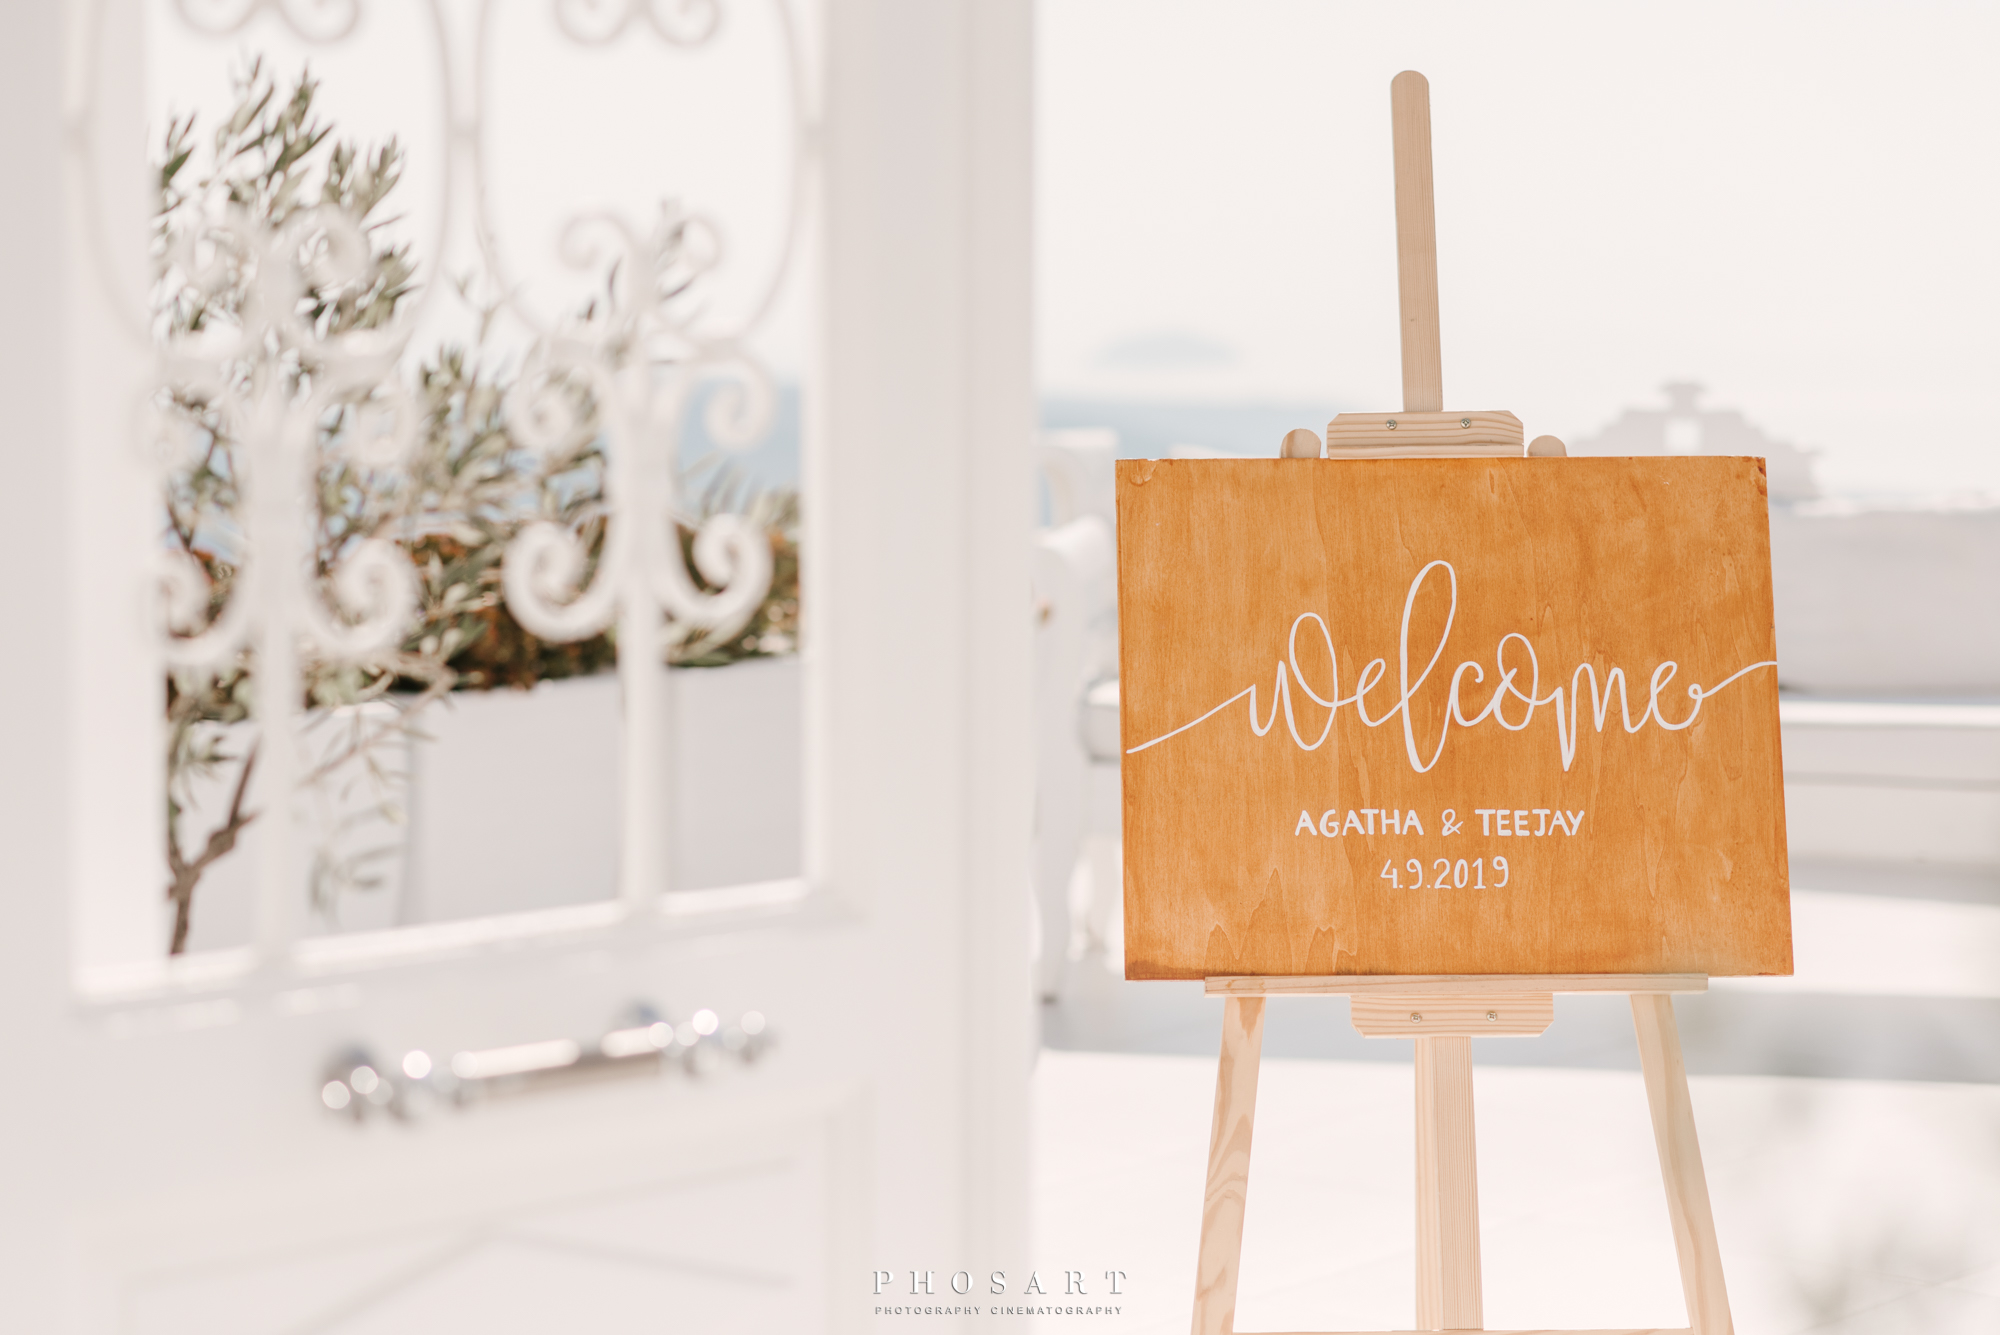 A wooden caballete with canvas that writes welcome Agatha & Teejay